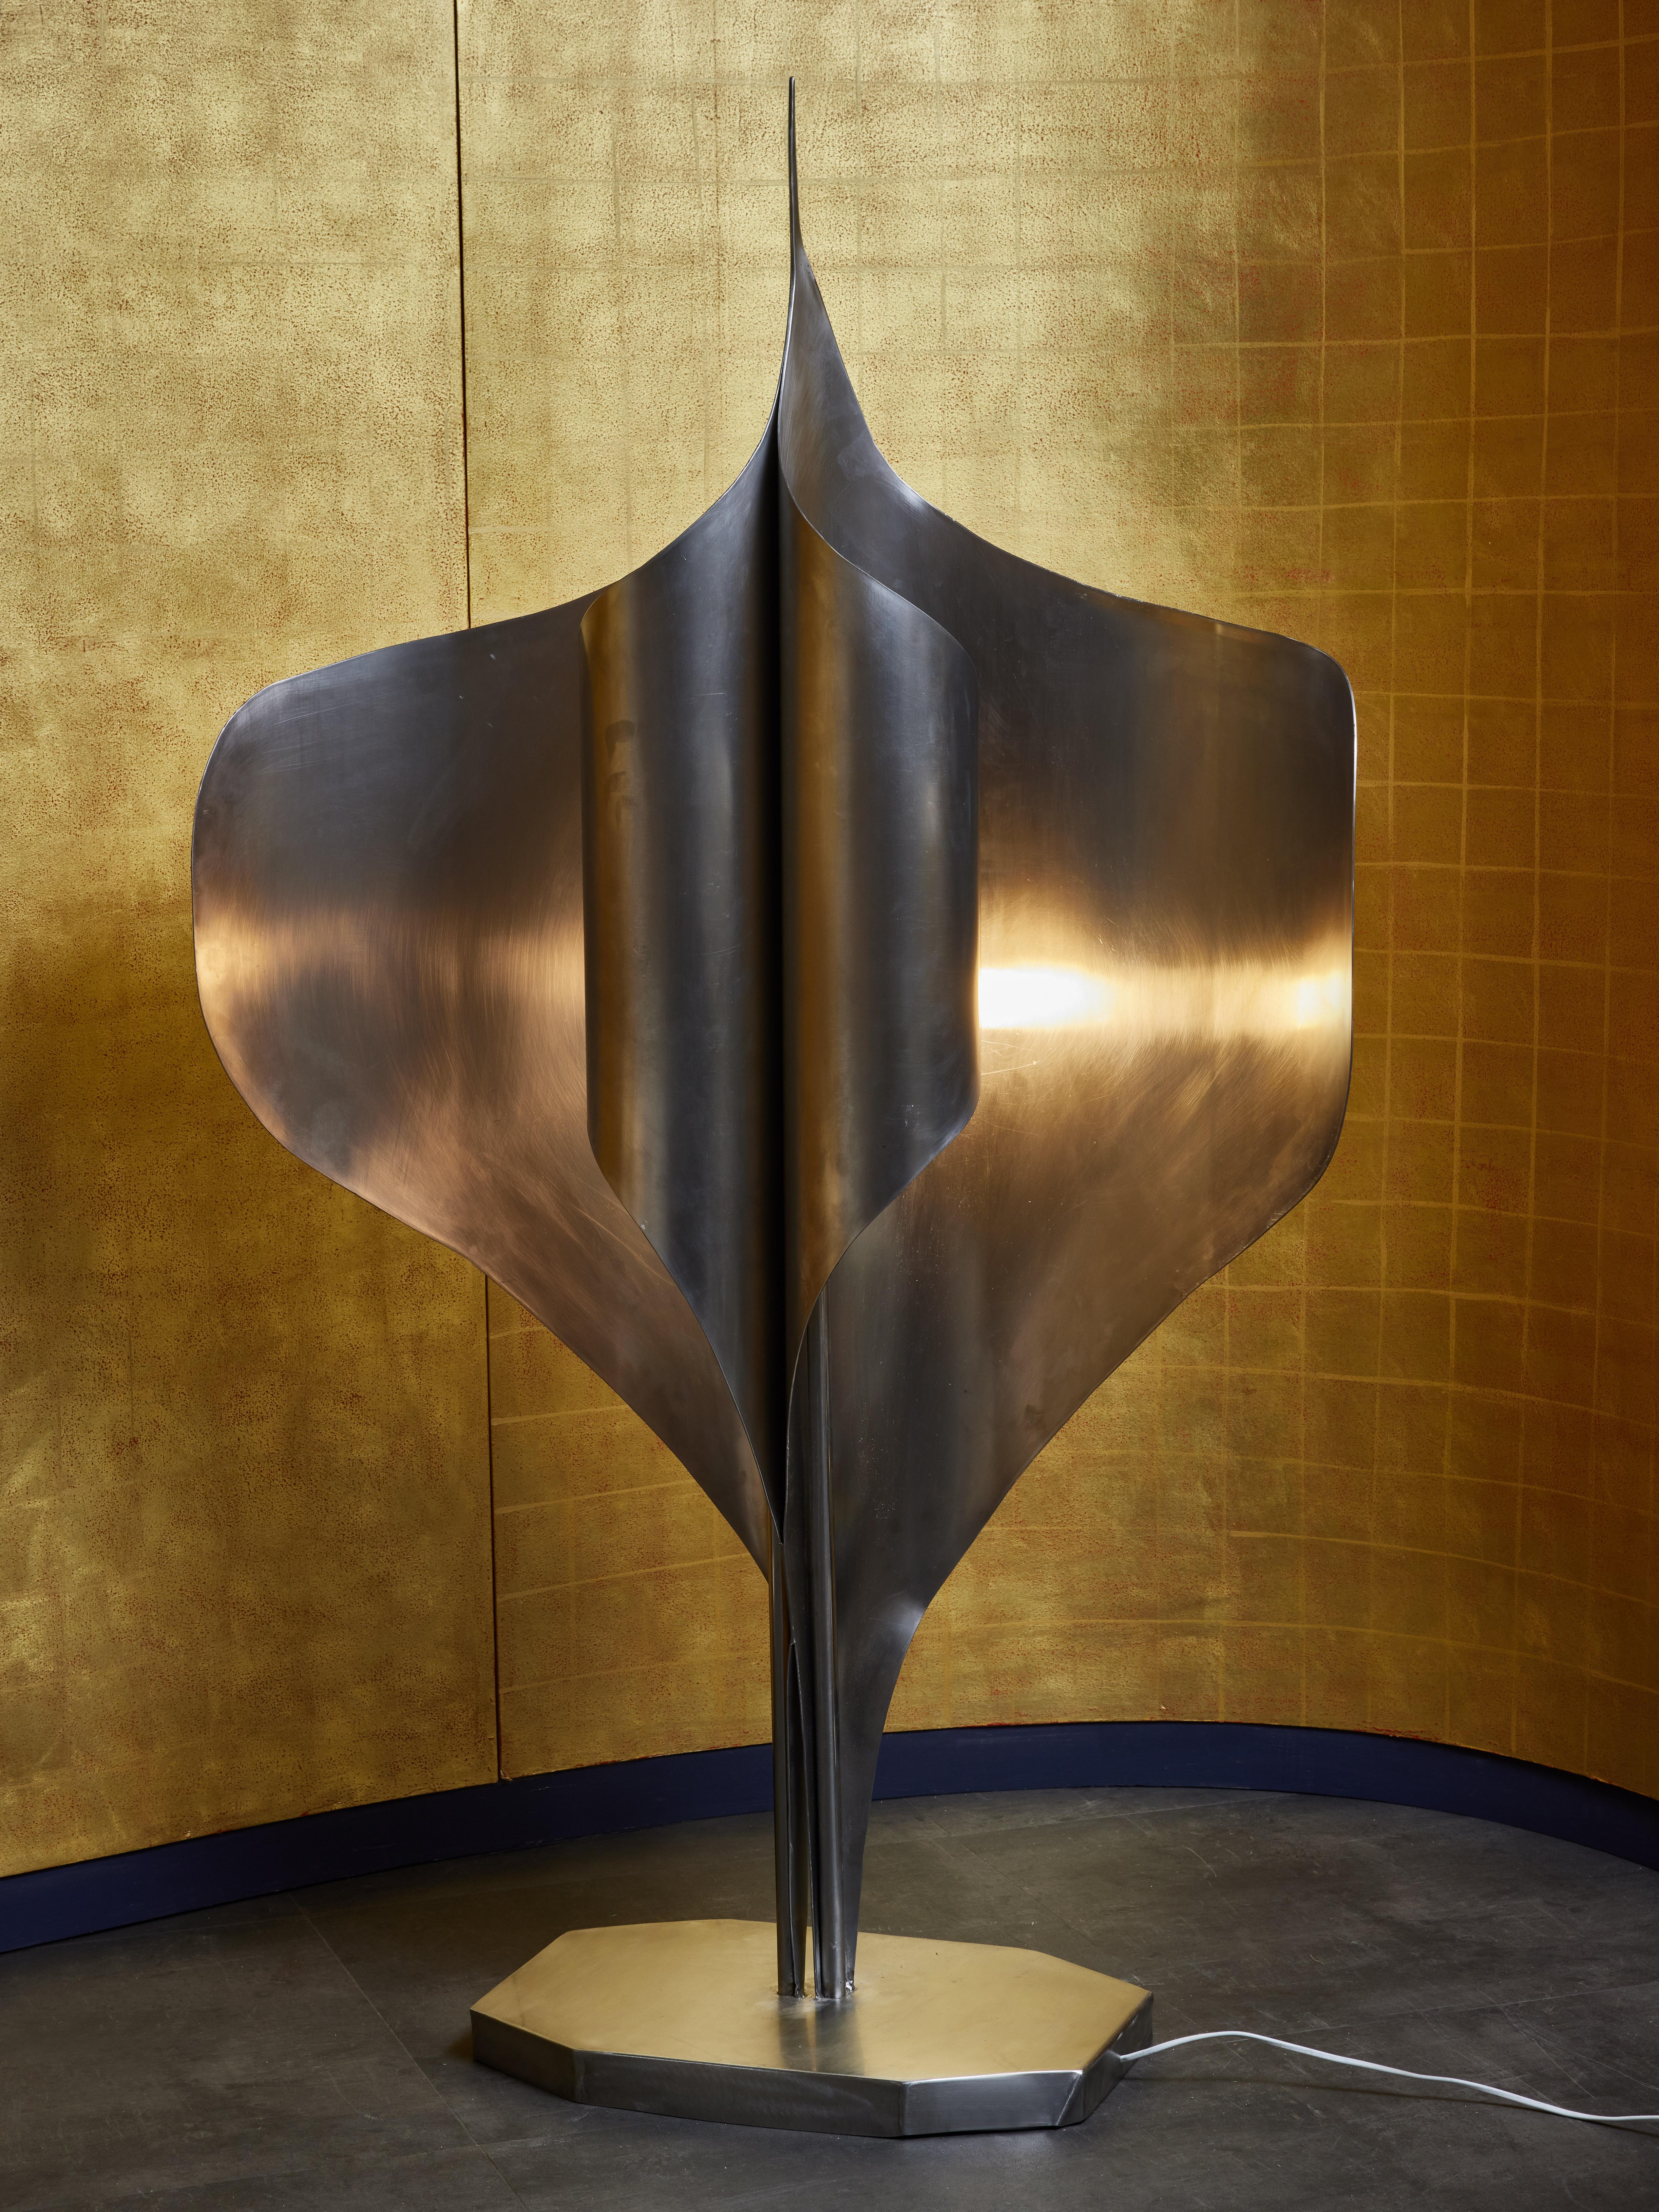 Unique floor lamp by the french sculptor and artist Louis Durot.
This enlighten sculpture is made of two sheets of steel symmetrically cut and bent.


Louis Durot
Born in Paris in 1939, Louis Durot is a globally recognized chemical engineer renowned